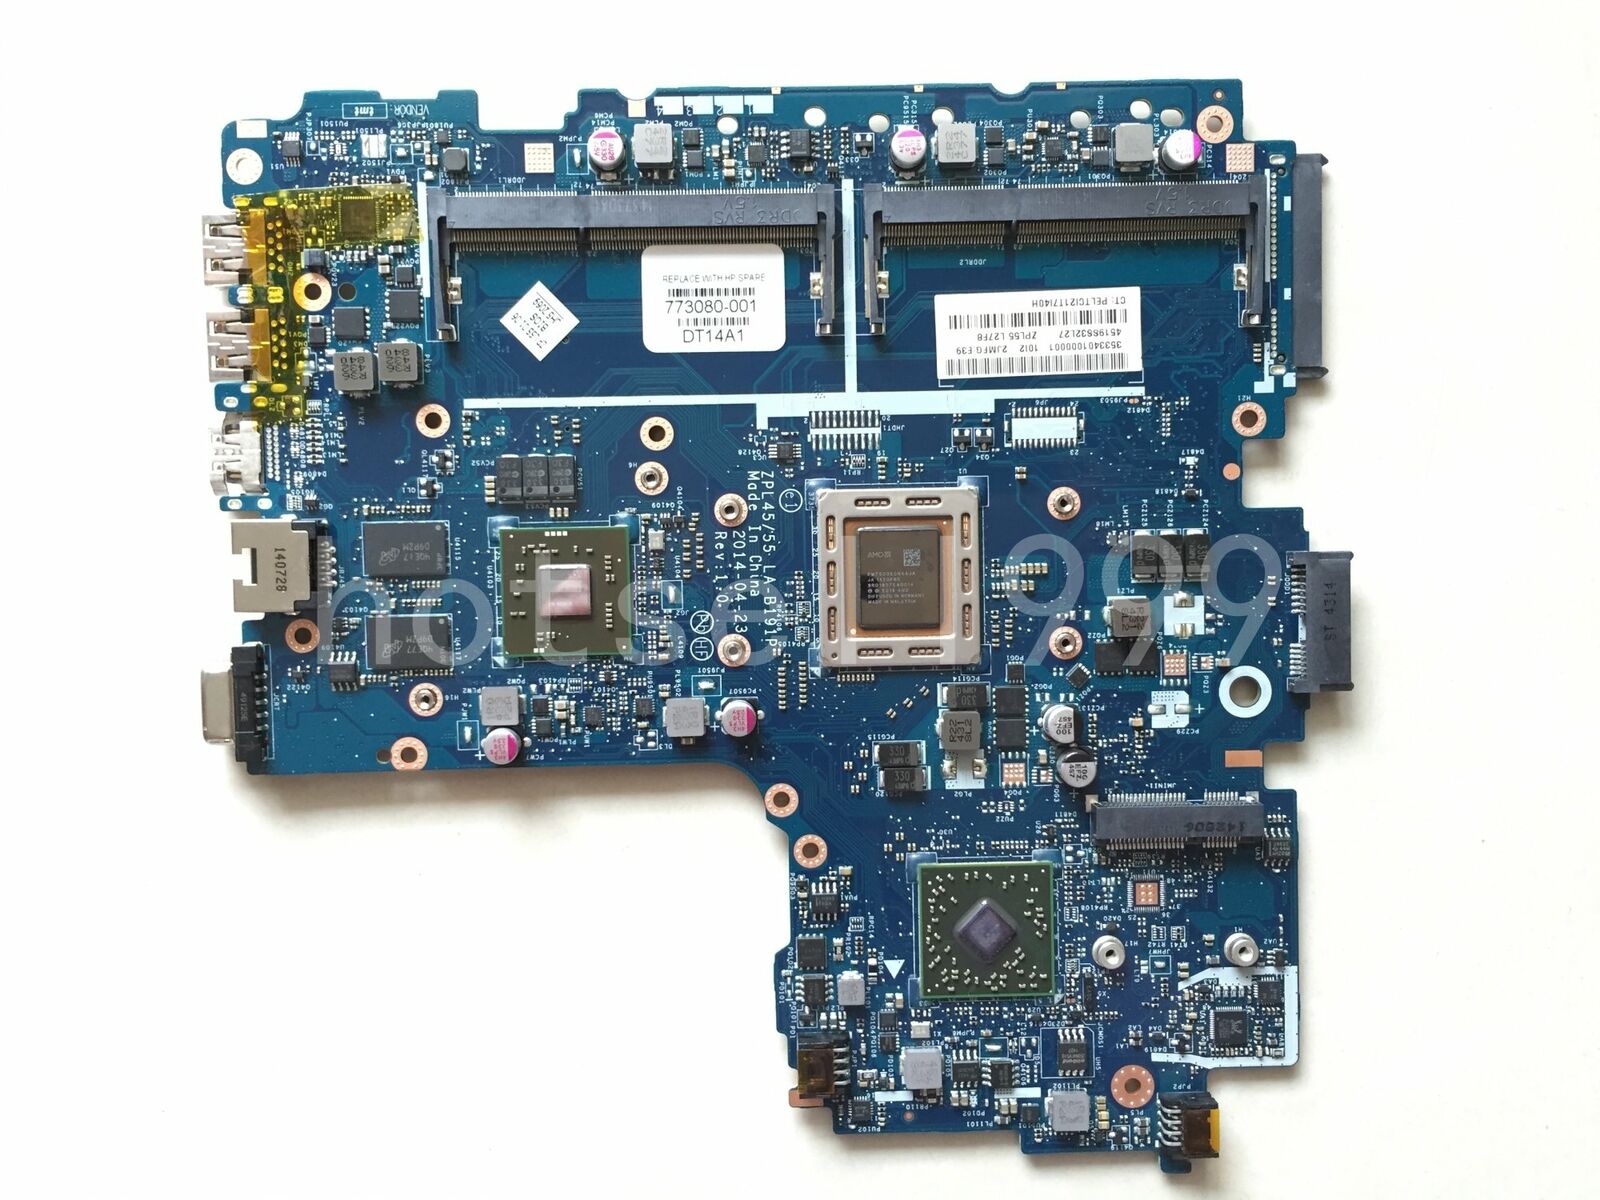 For HP Probook 455 G2 773080-001 Laptop Motherboard FX-7500 R7 M265 2GB Tested Brand: HP Number of Memory